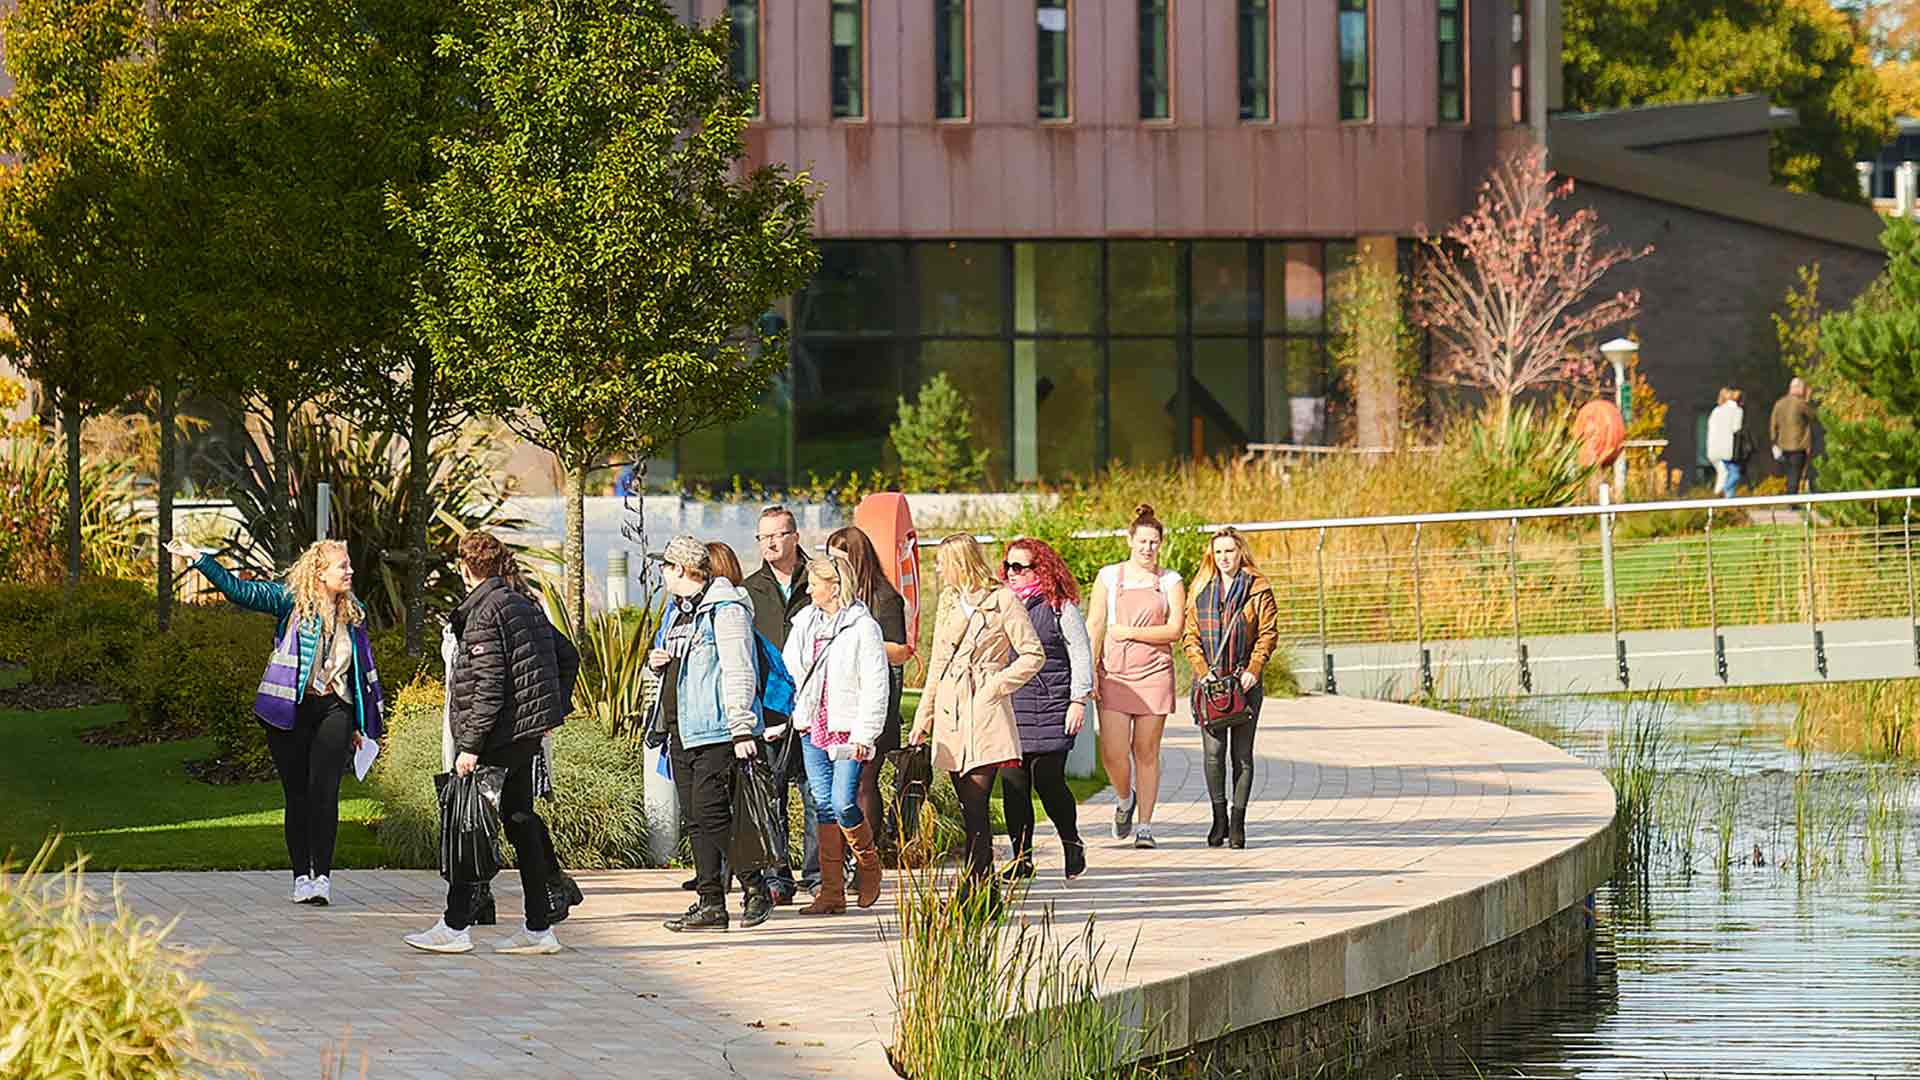 A student guide leads a group of prospective students and their family members on a tour of the campus, near the Catalyst building during an Edge Hill University open day.